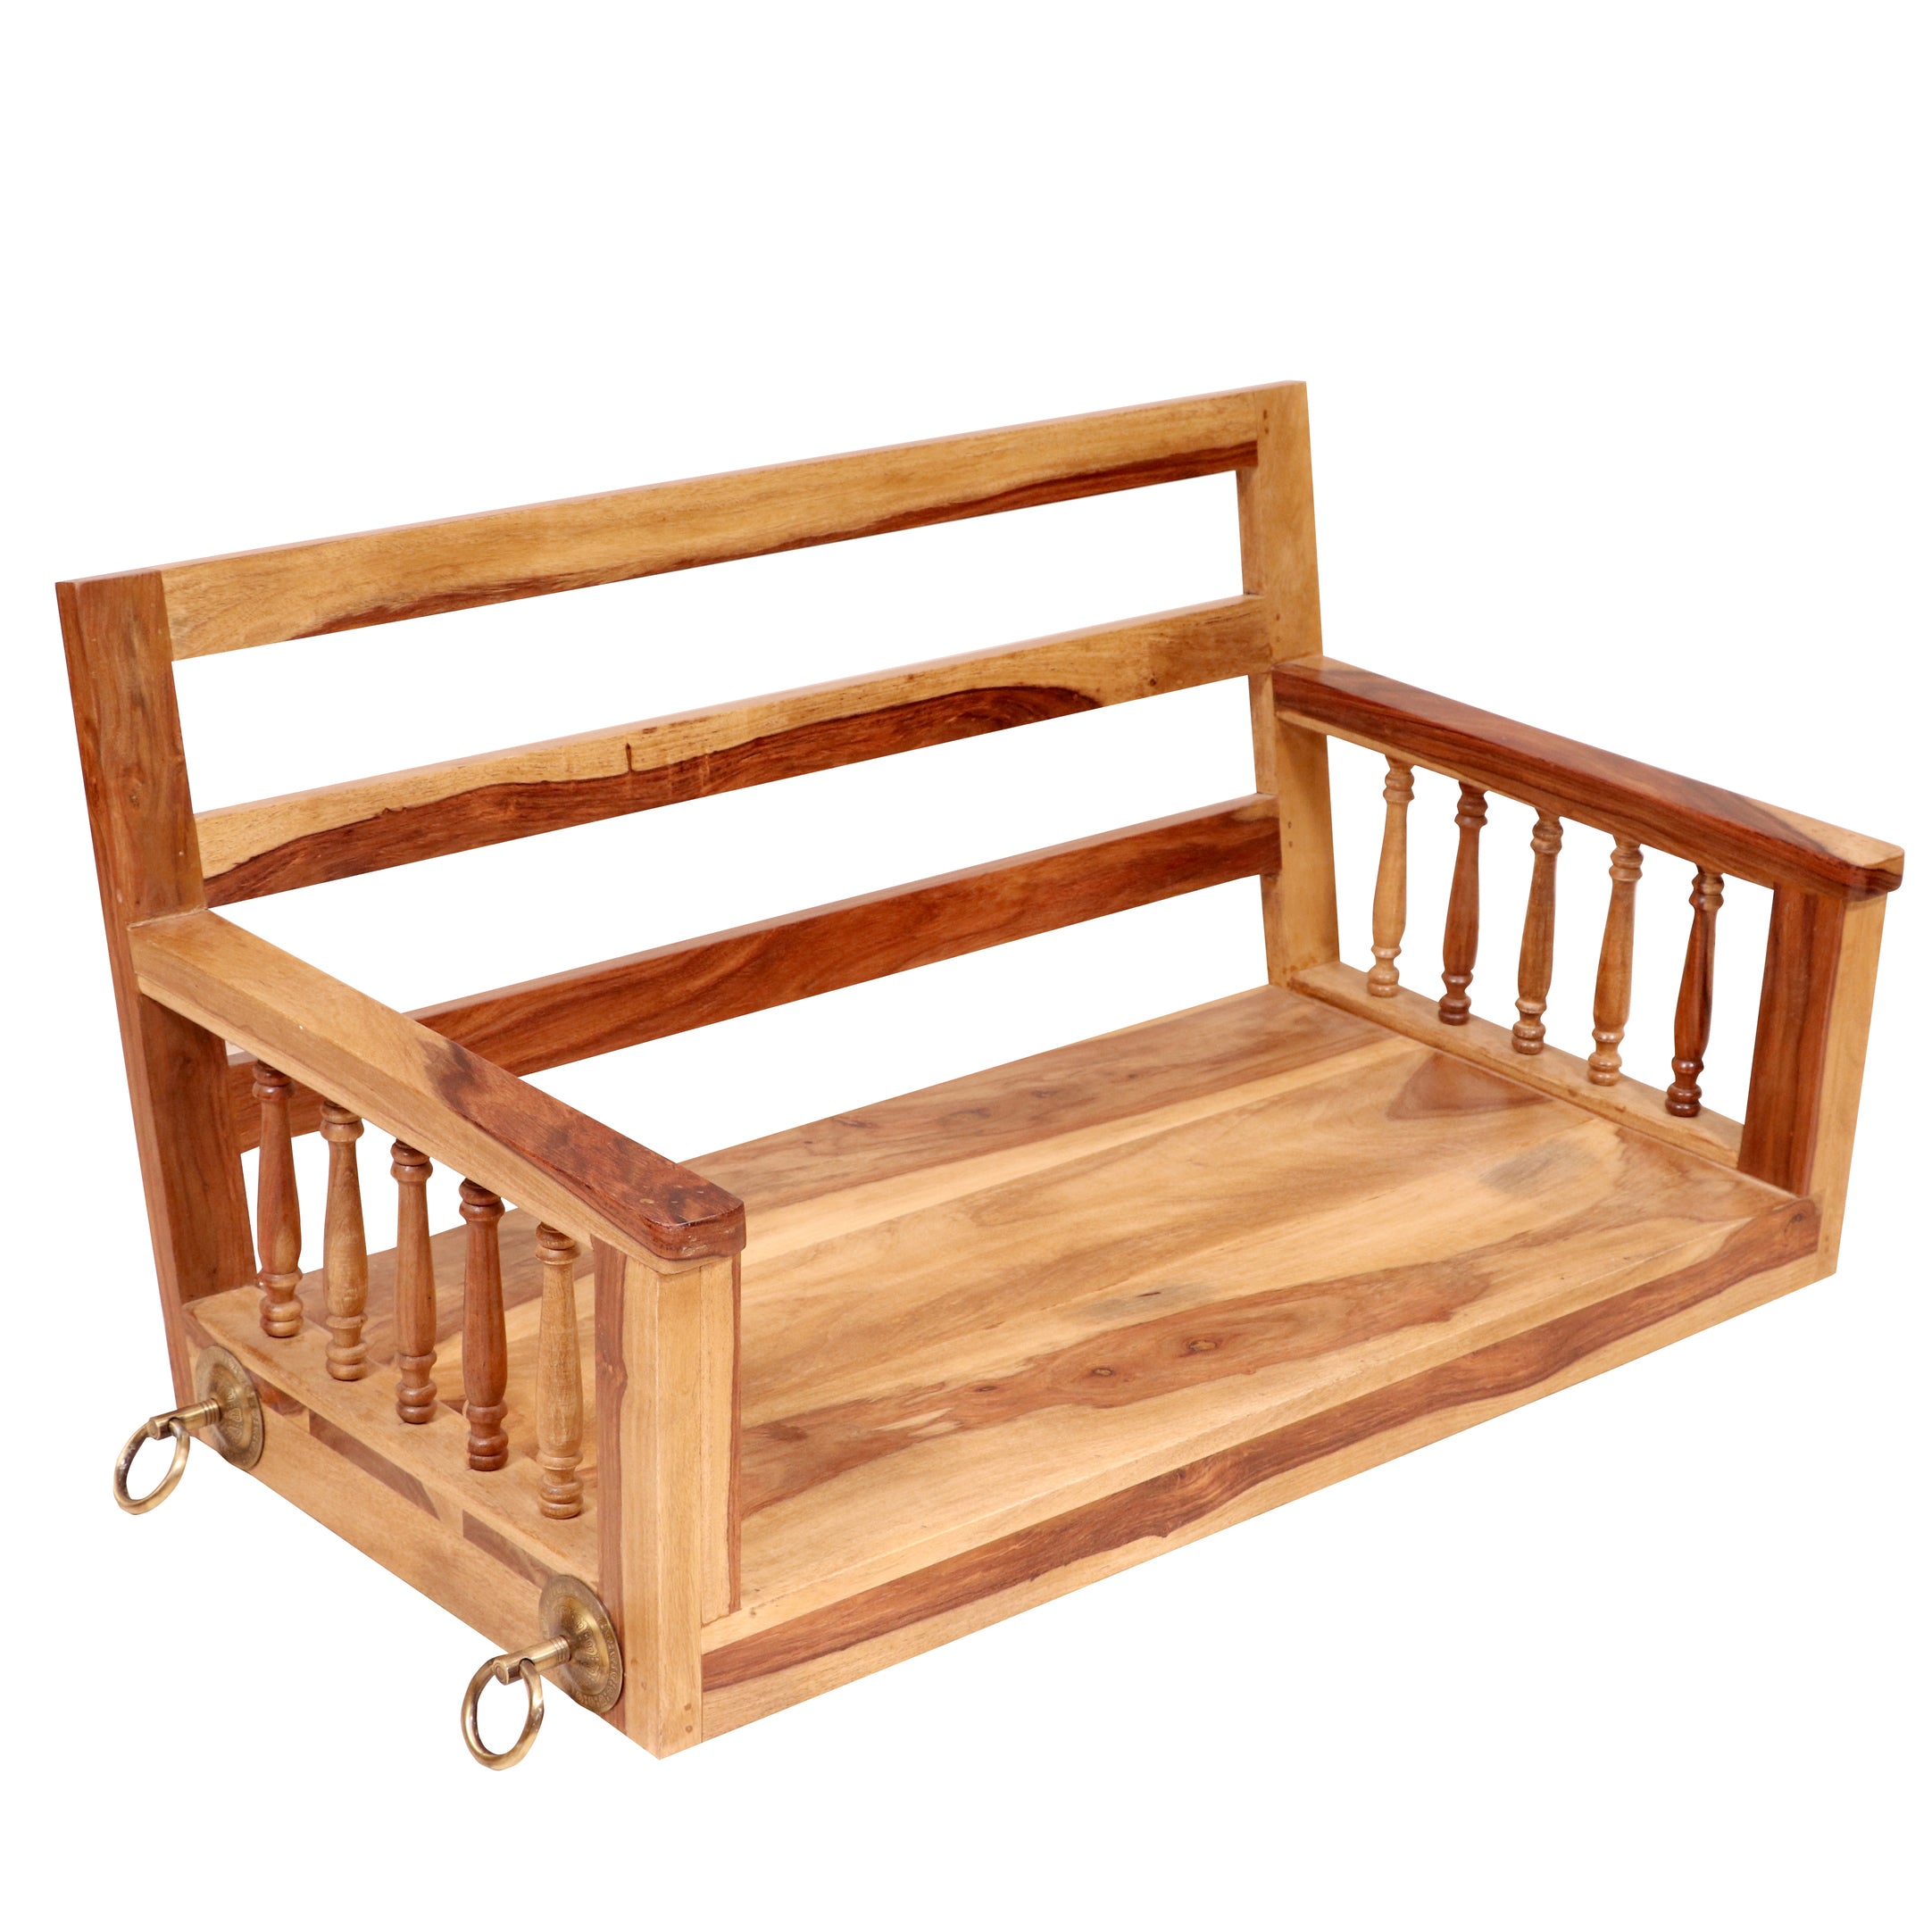 Seating bench concept Wooden Swing Swing